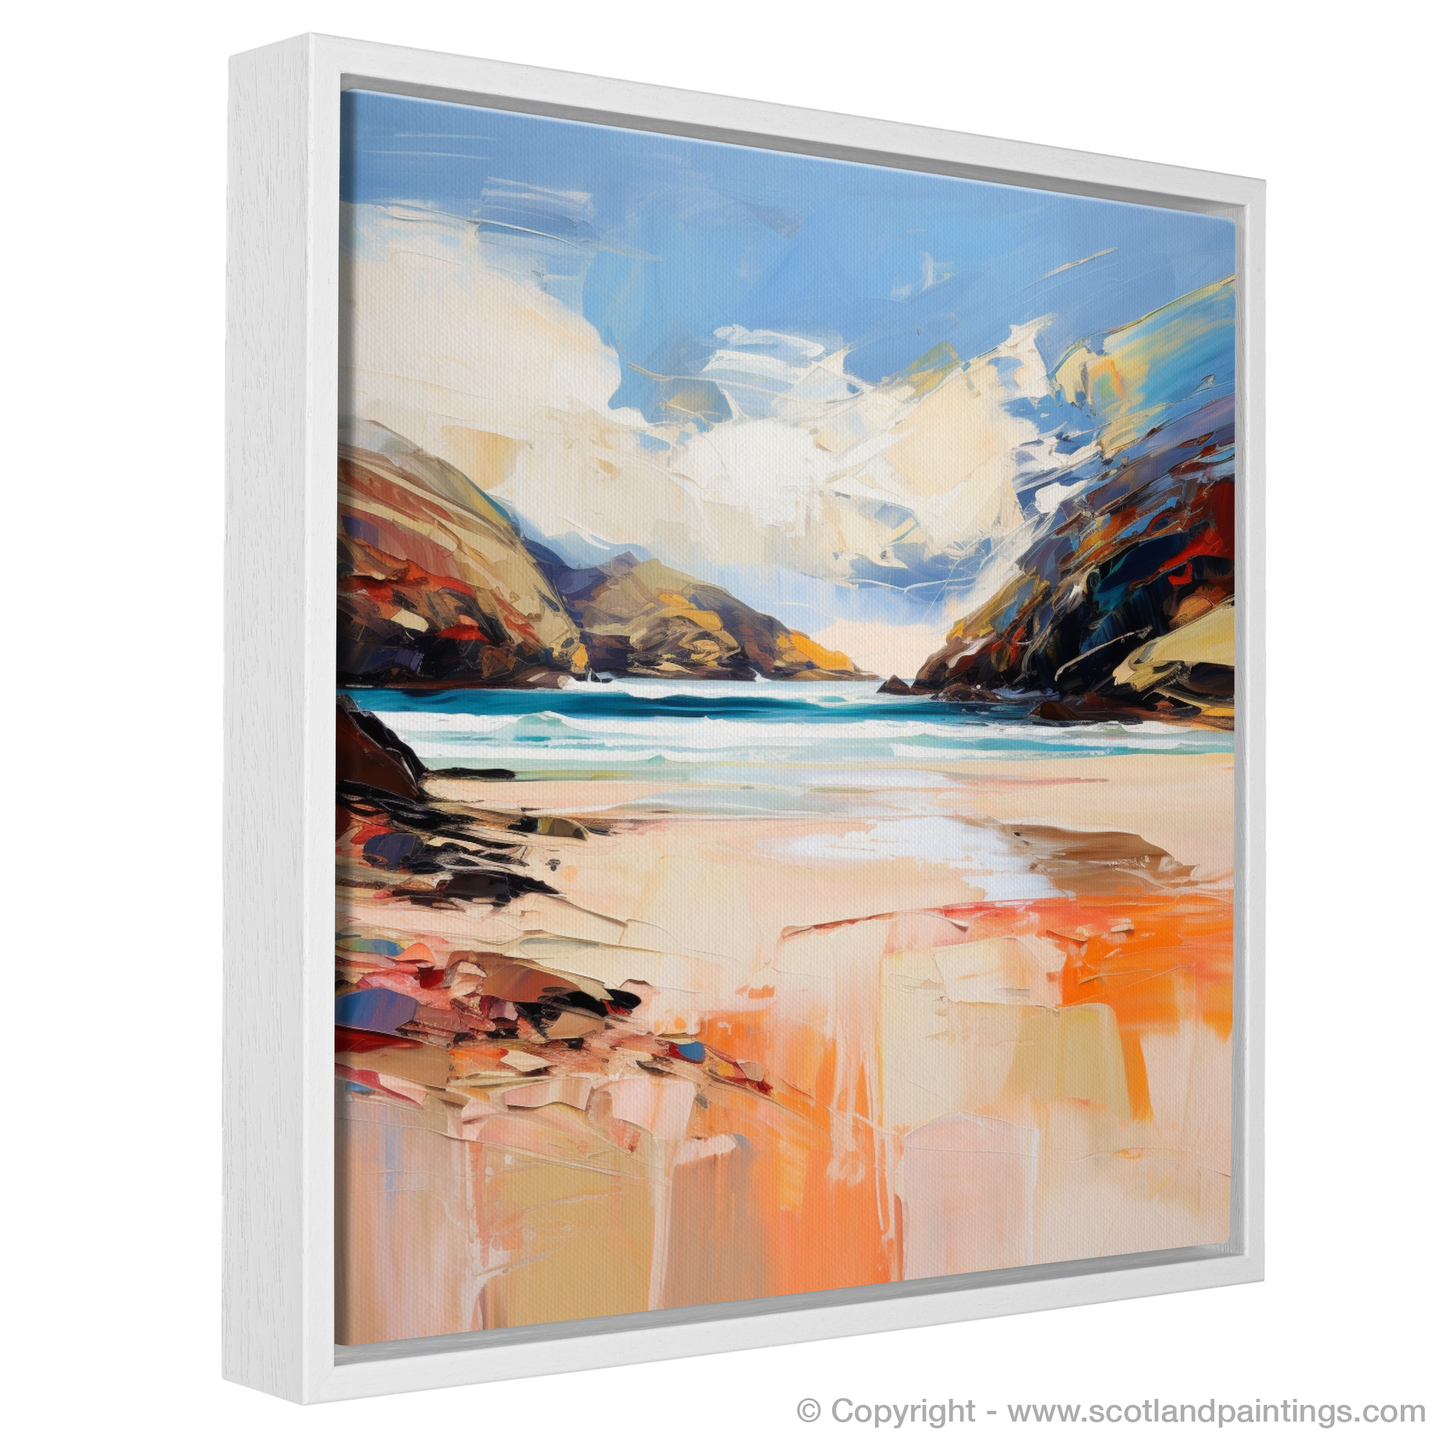 Painting and Art Print of Sandwood Bay, Sutherland entitled "Expressionist Ode to Sandwood Bay".